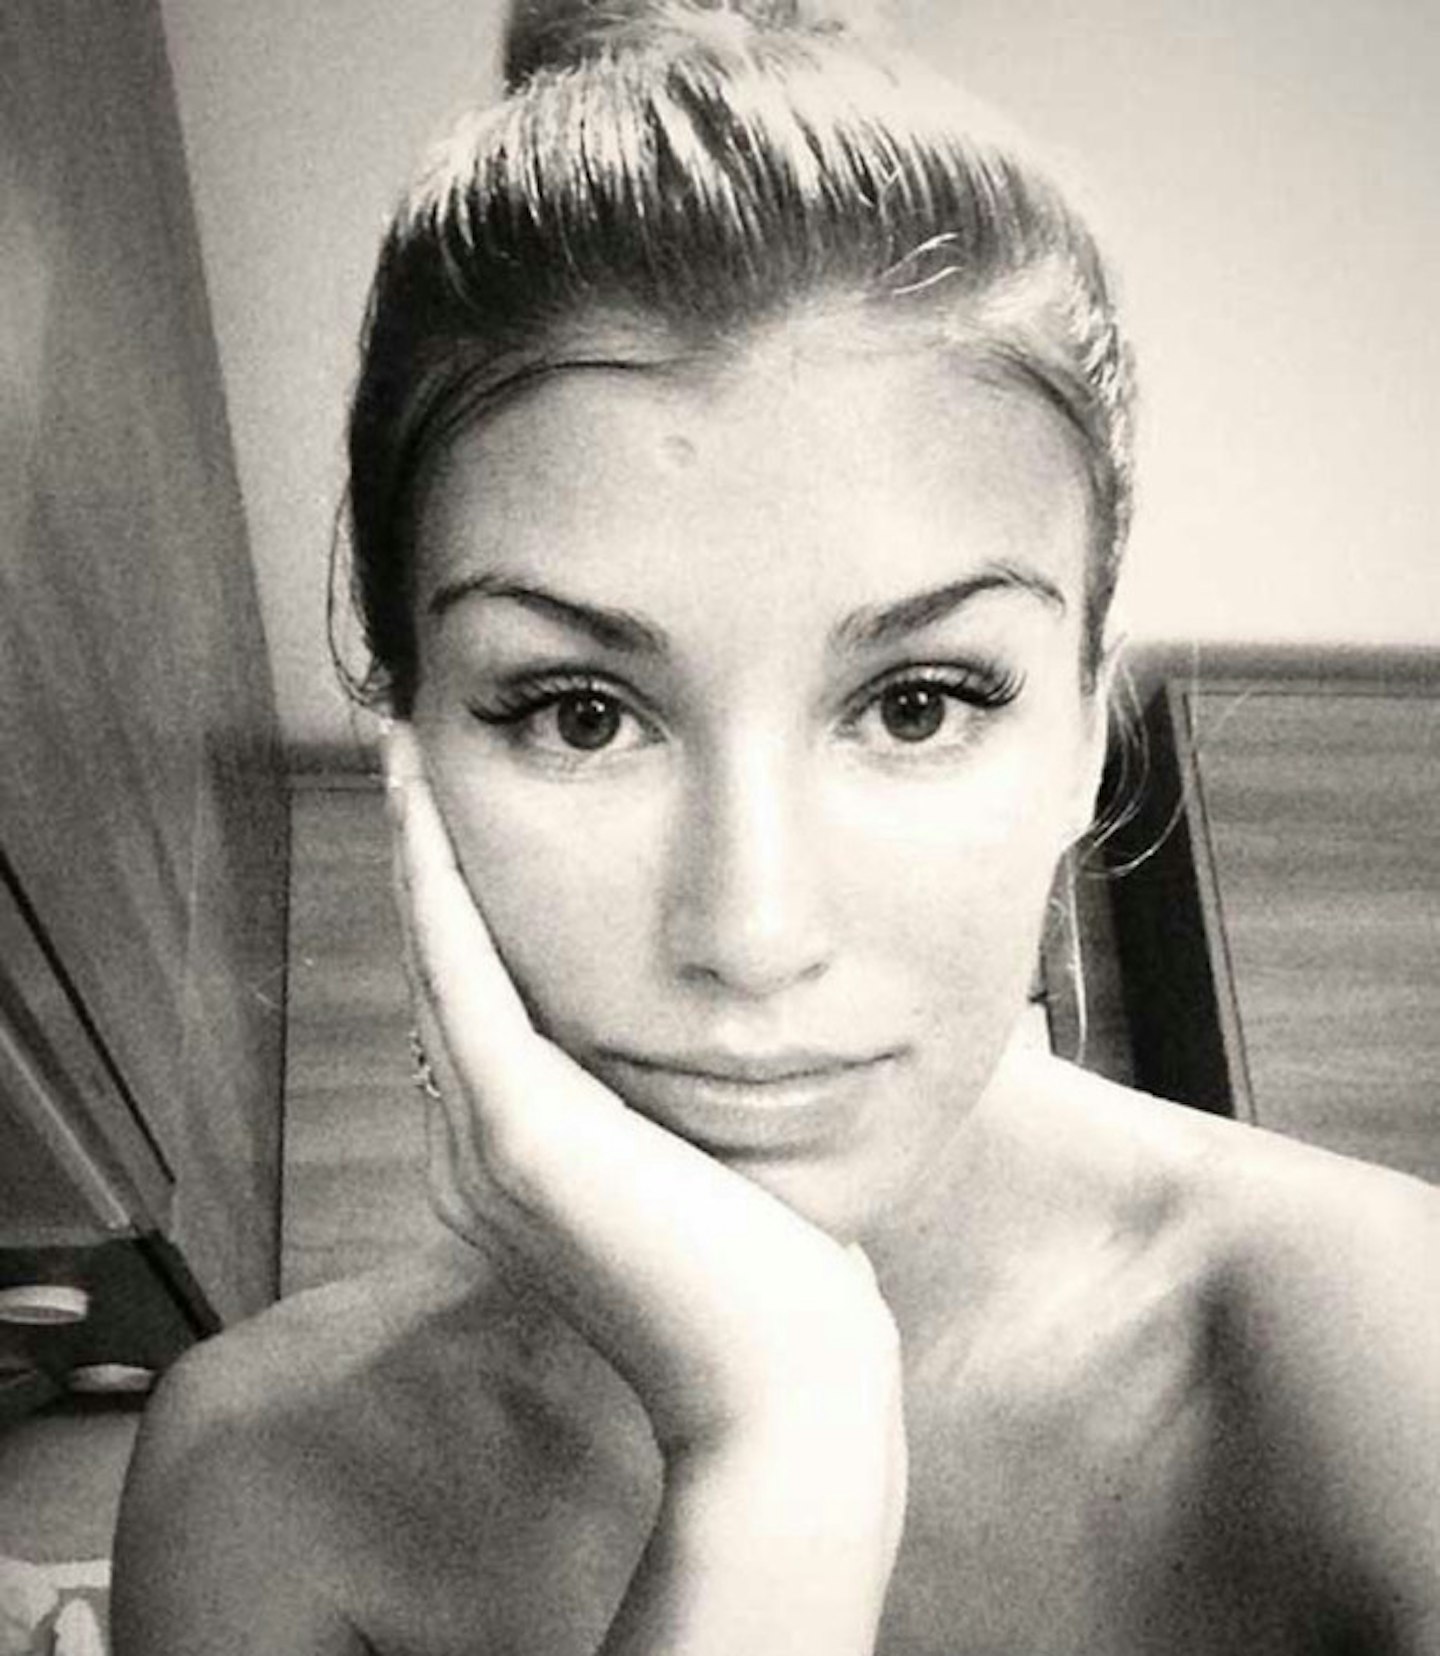 Amy Willerton looking amazing with no make-up on. It's not fair!